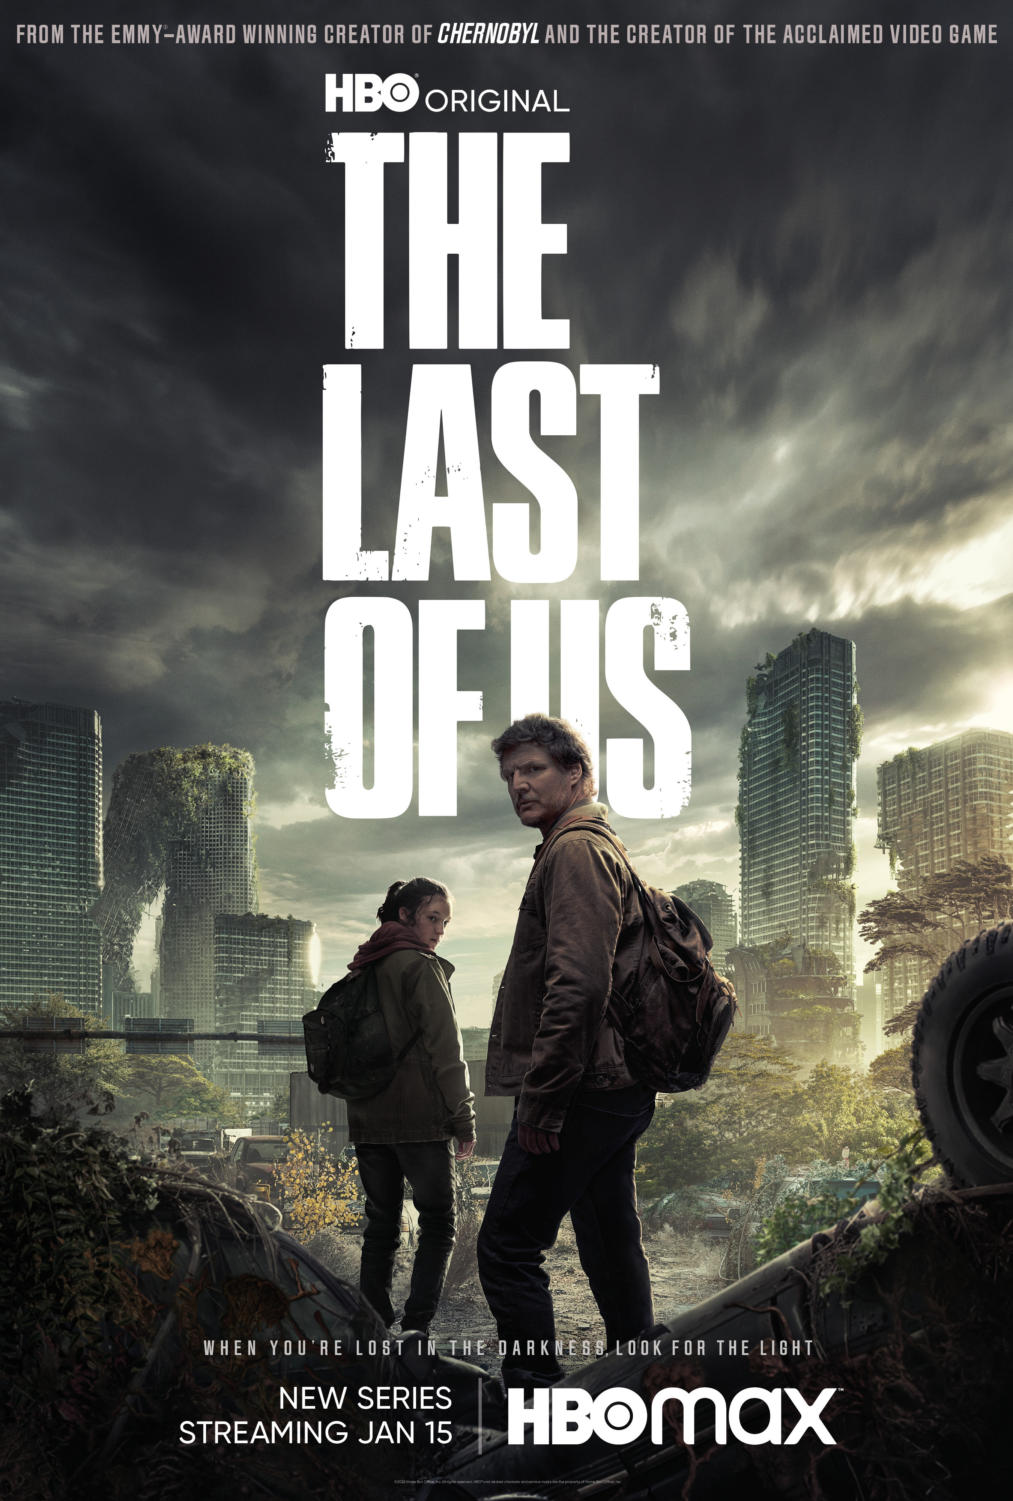 The Last Of Us adaptation feels grounded and real